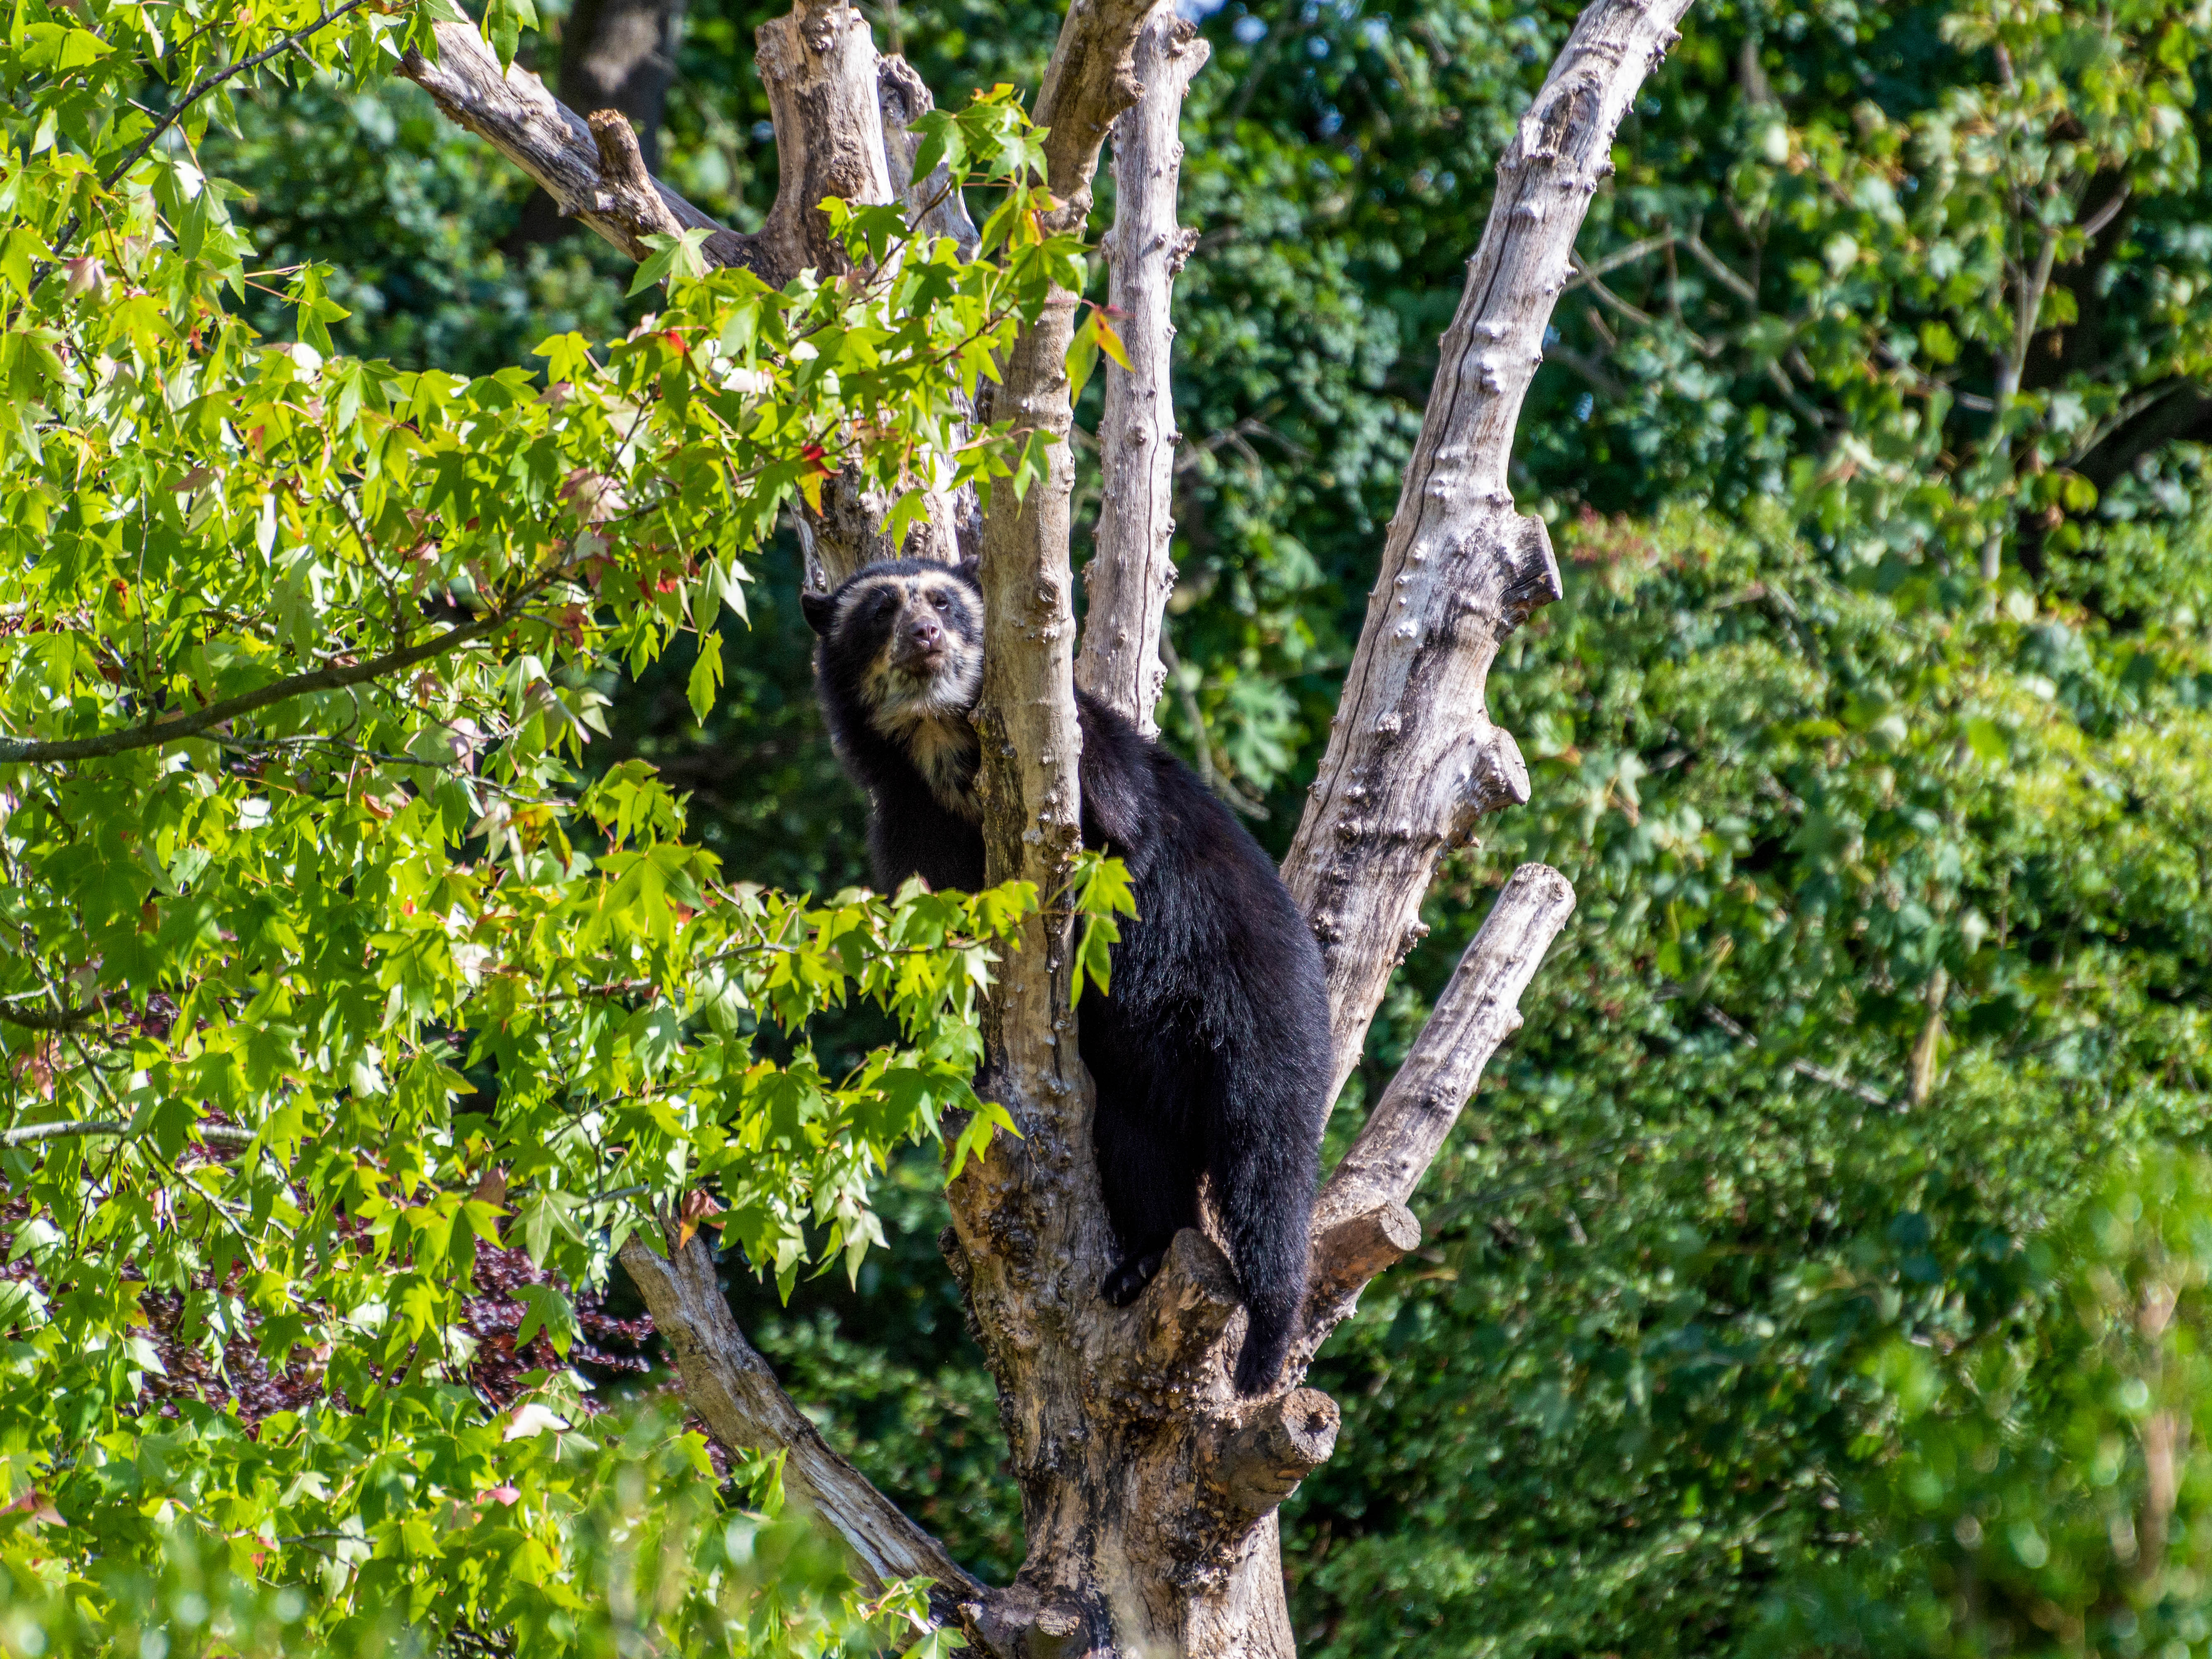 Spectacled bear in the Andes of Ecuador